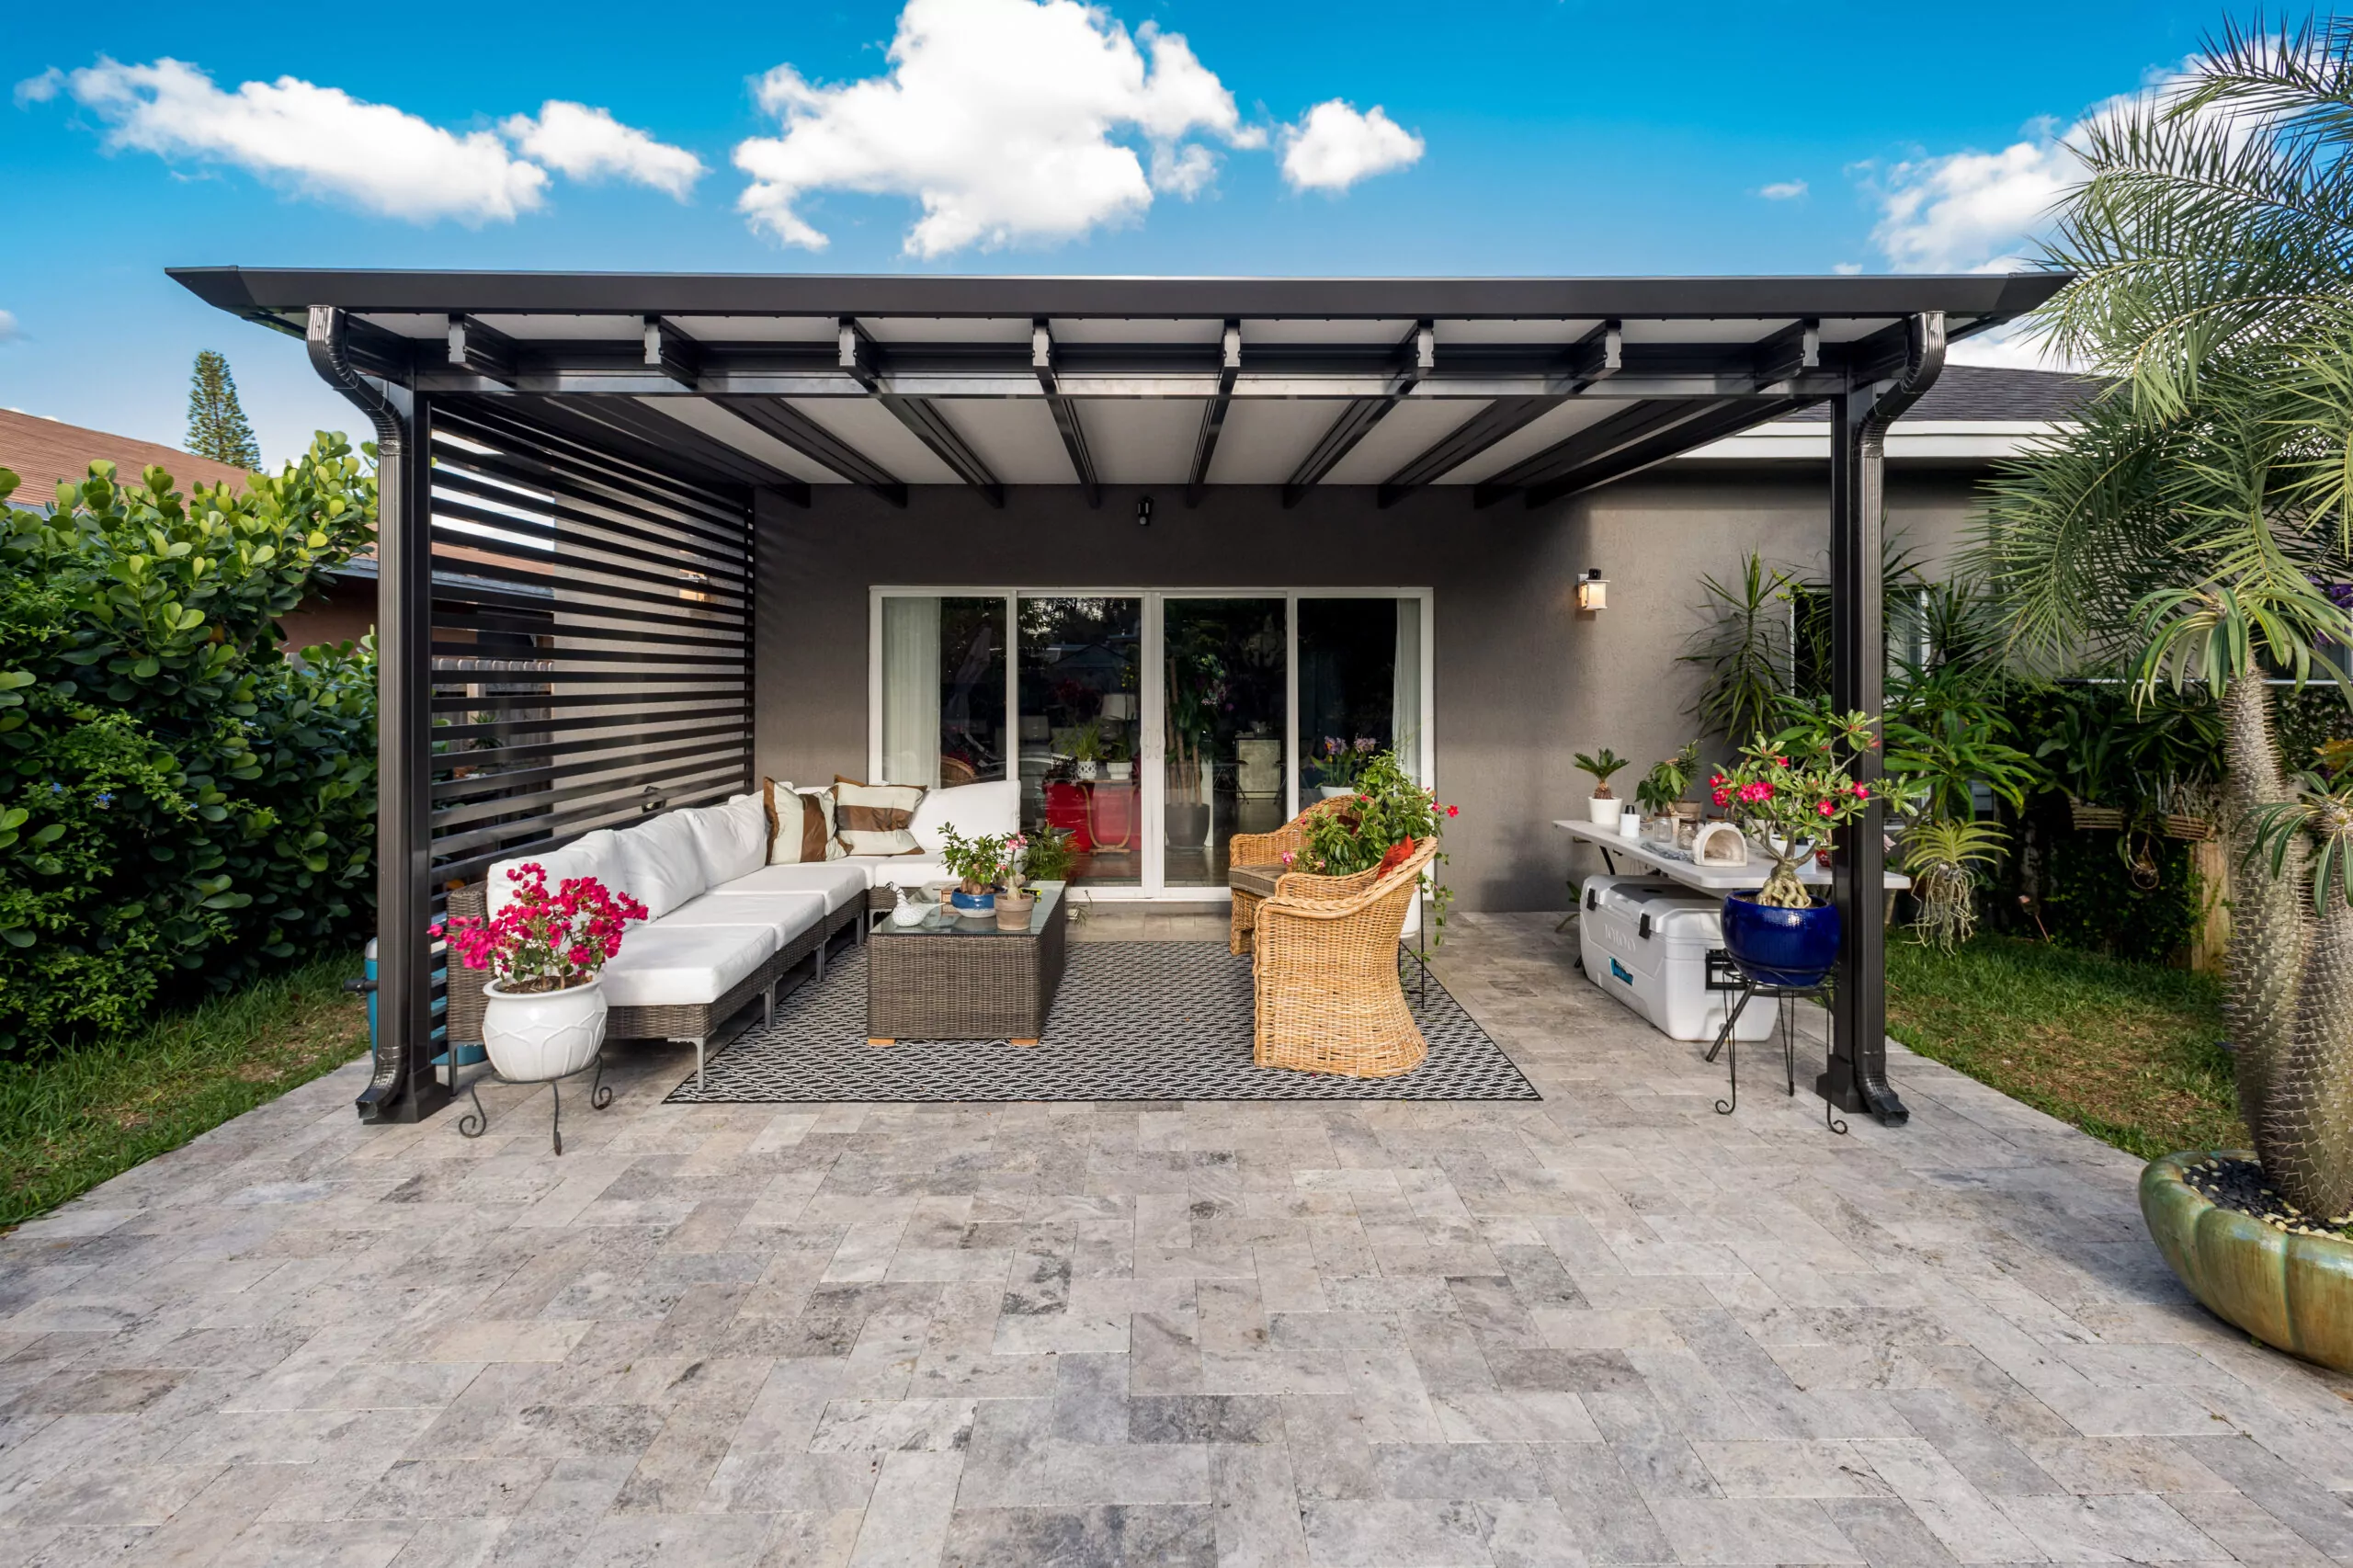 Patio Roofing | Roofs For Patios | Renaissance Patio